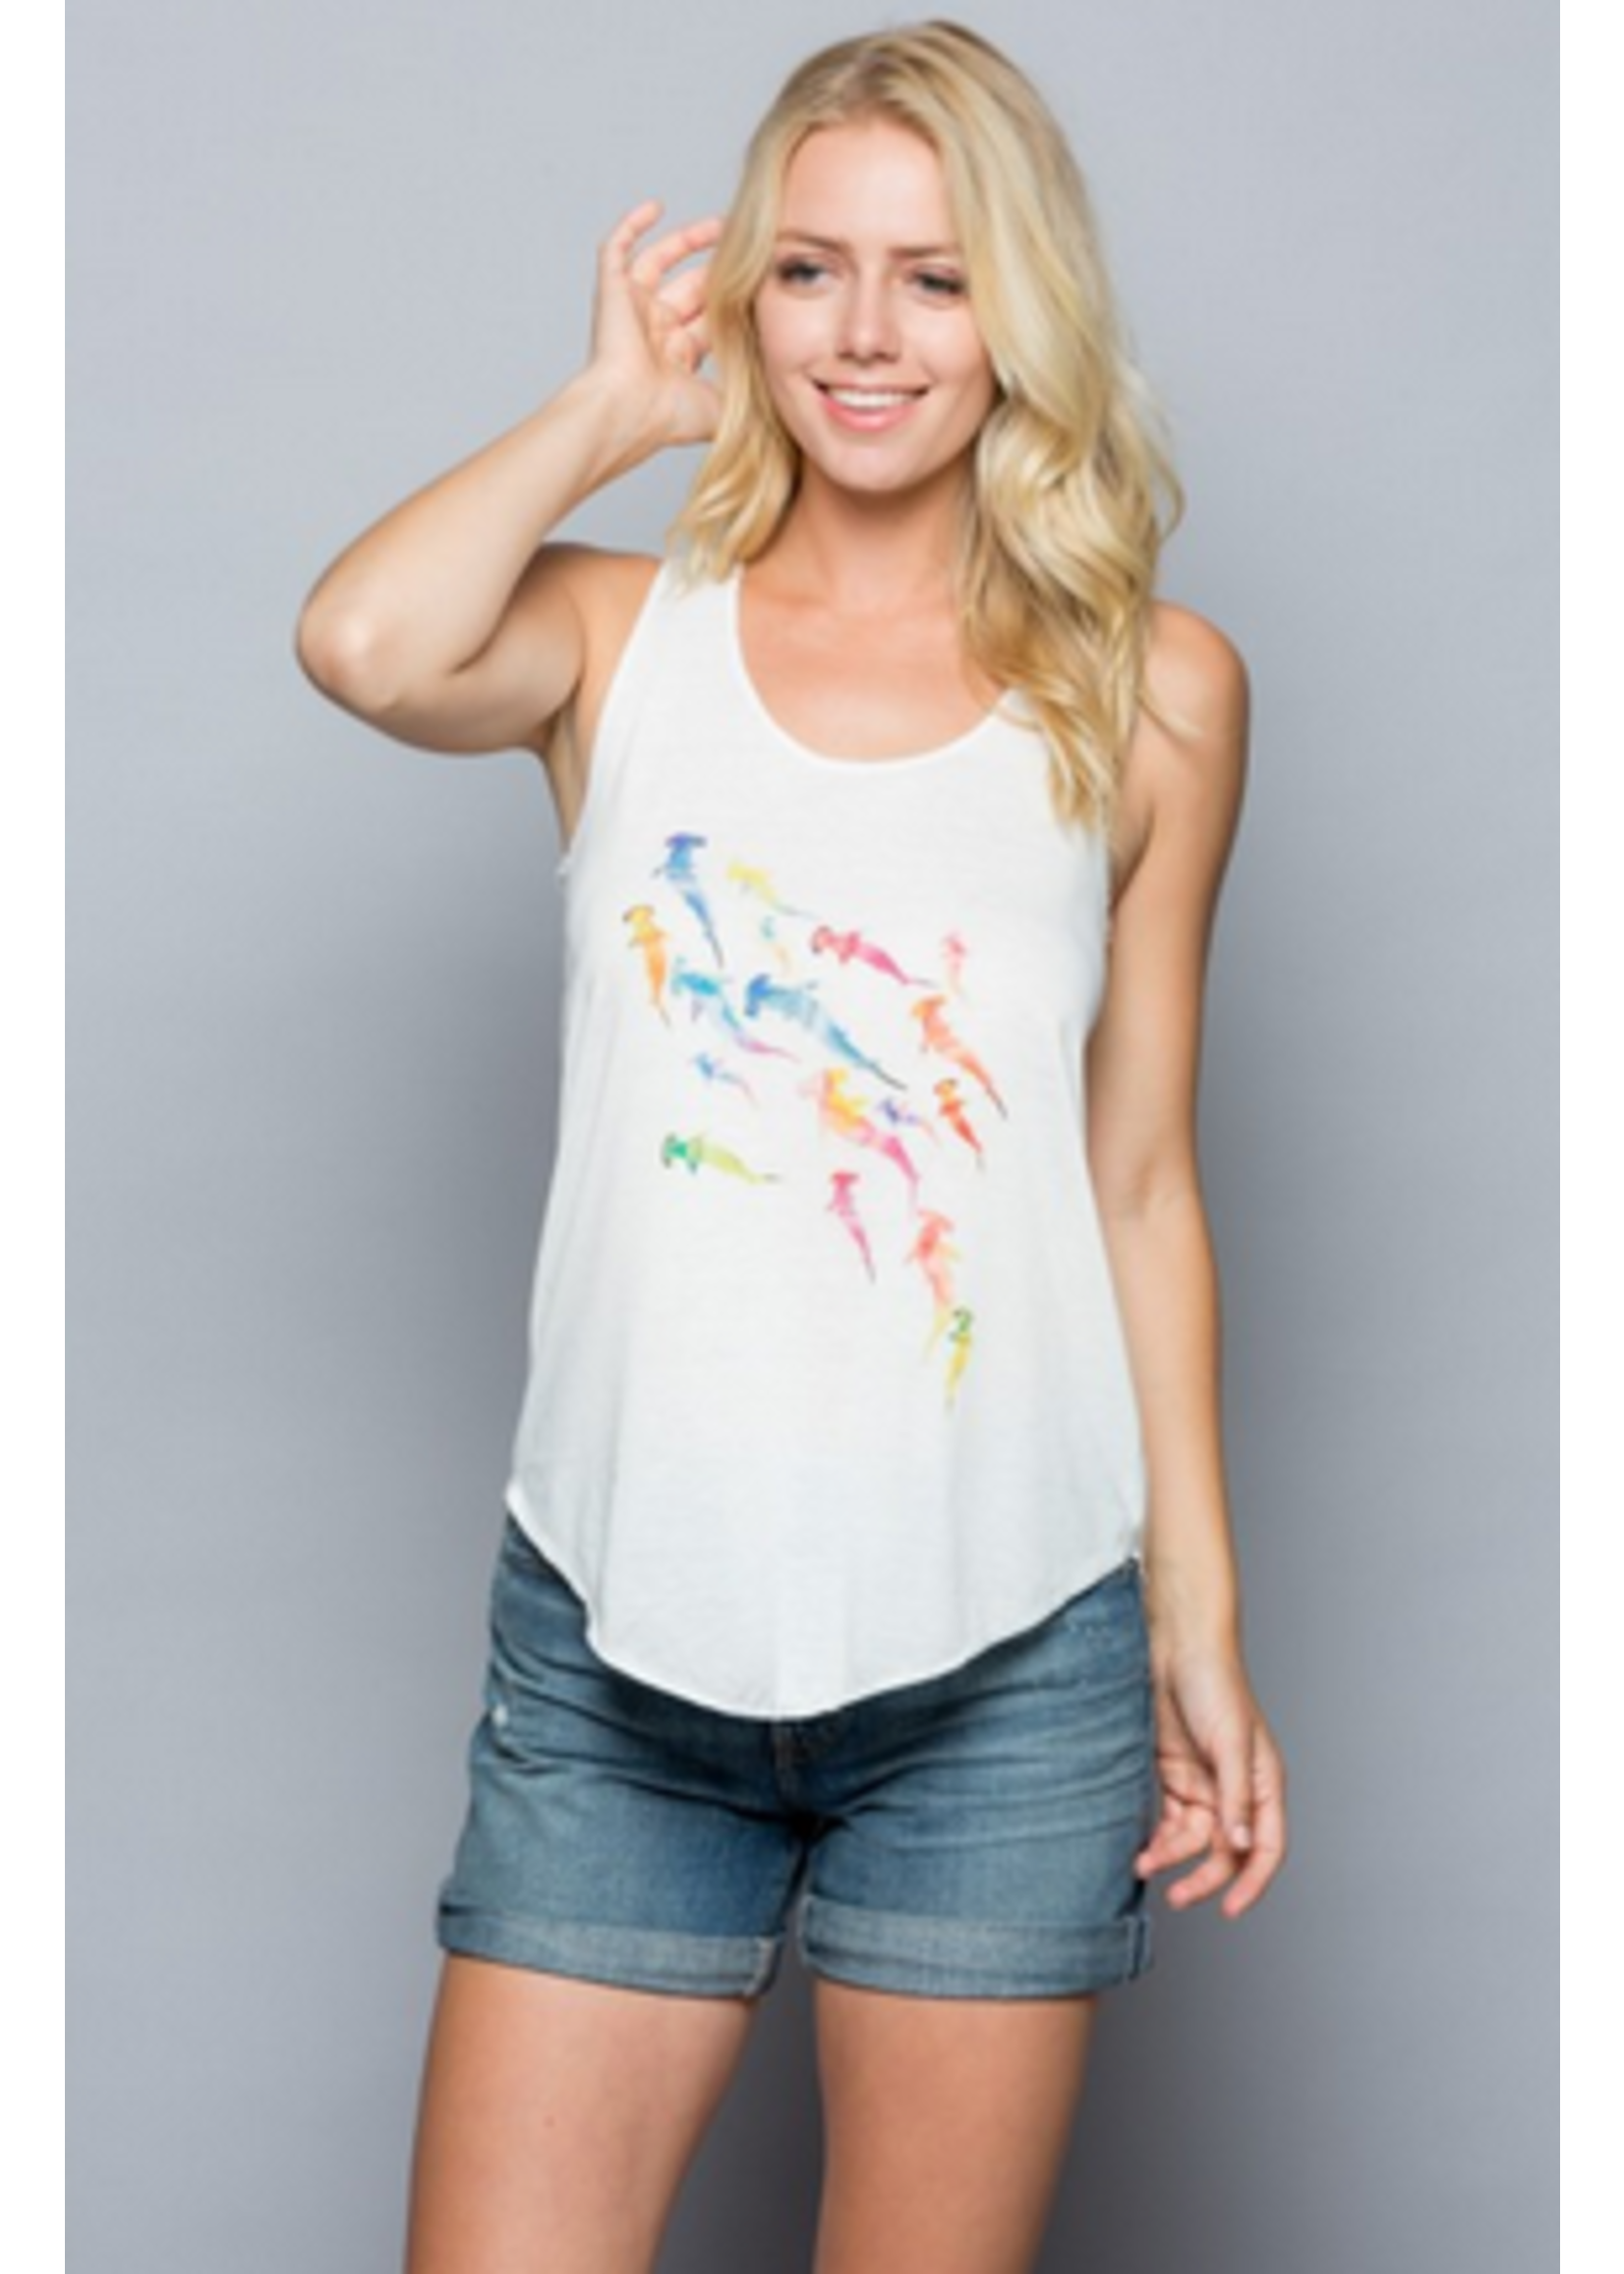 L.A. Soul White Tank Top Colorful Fishes